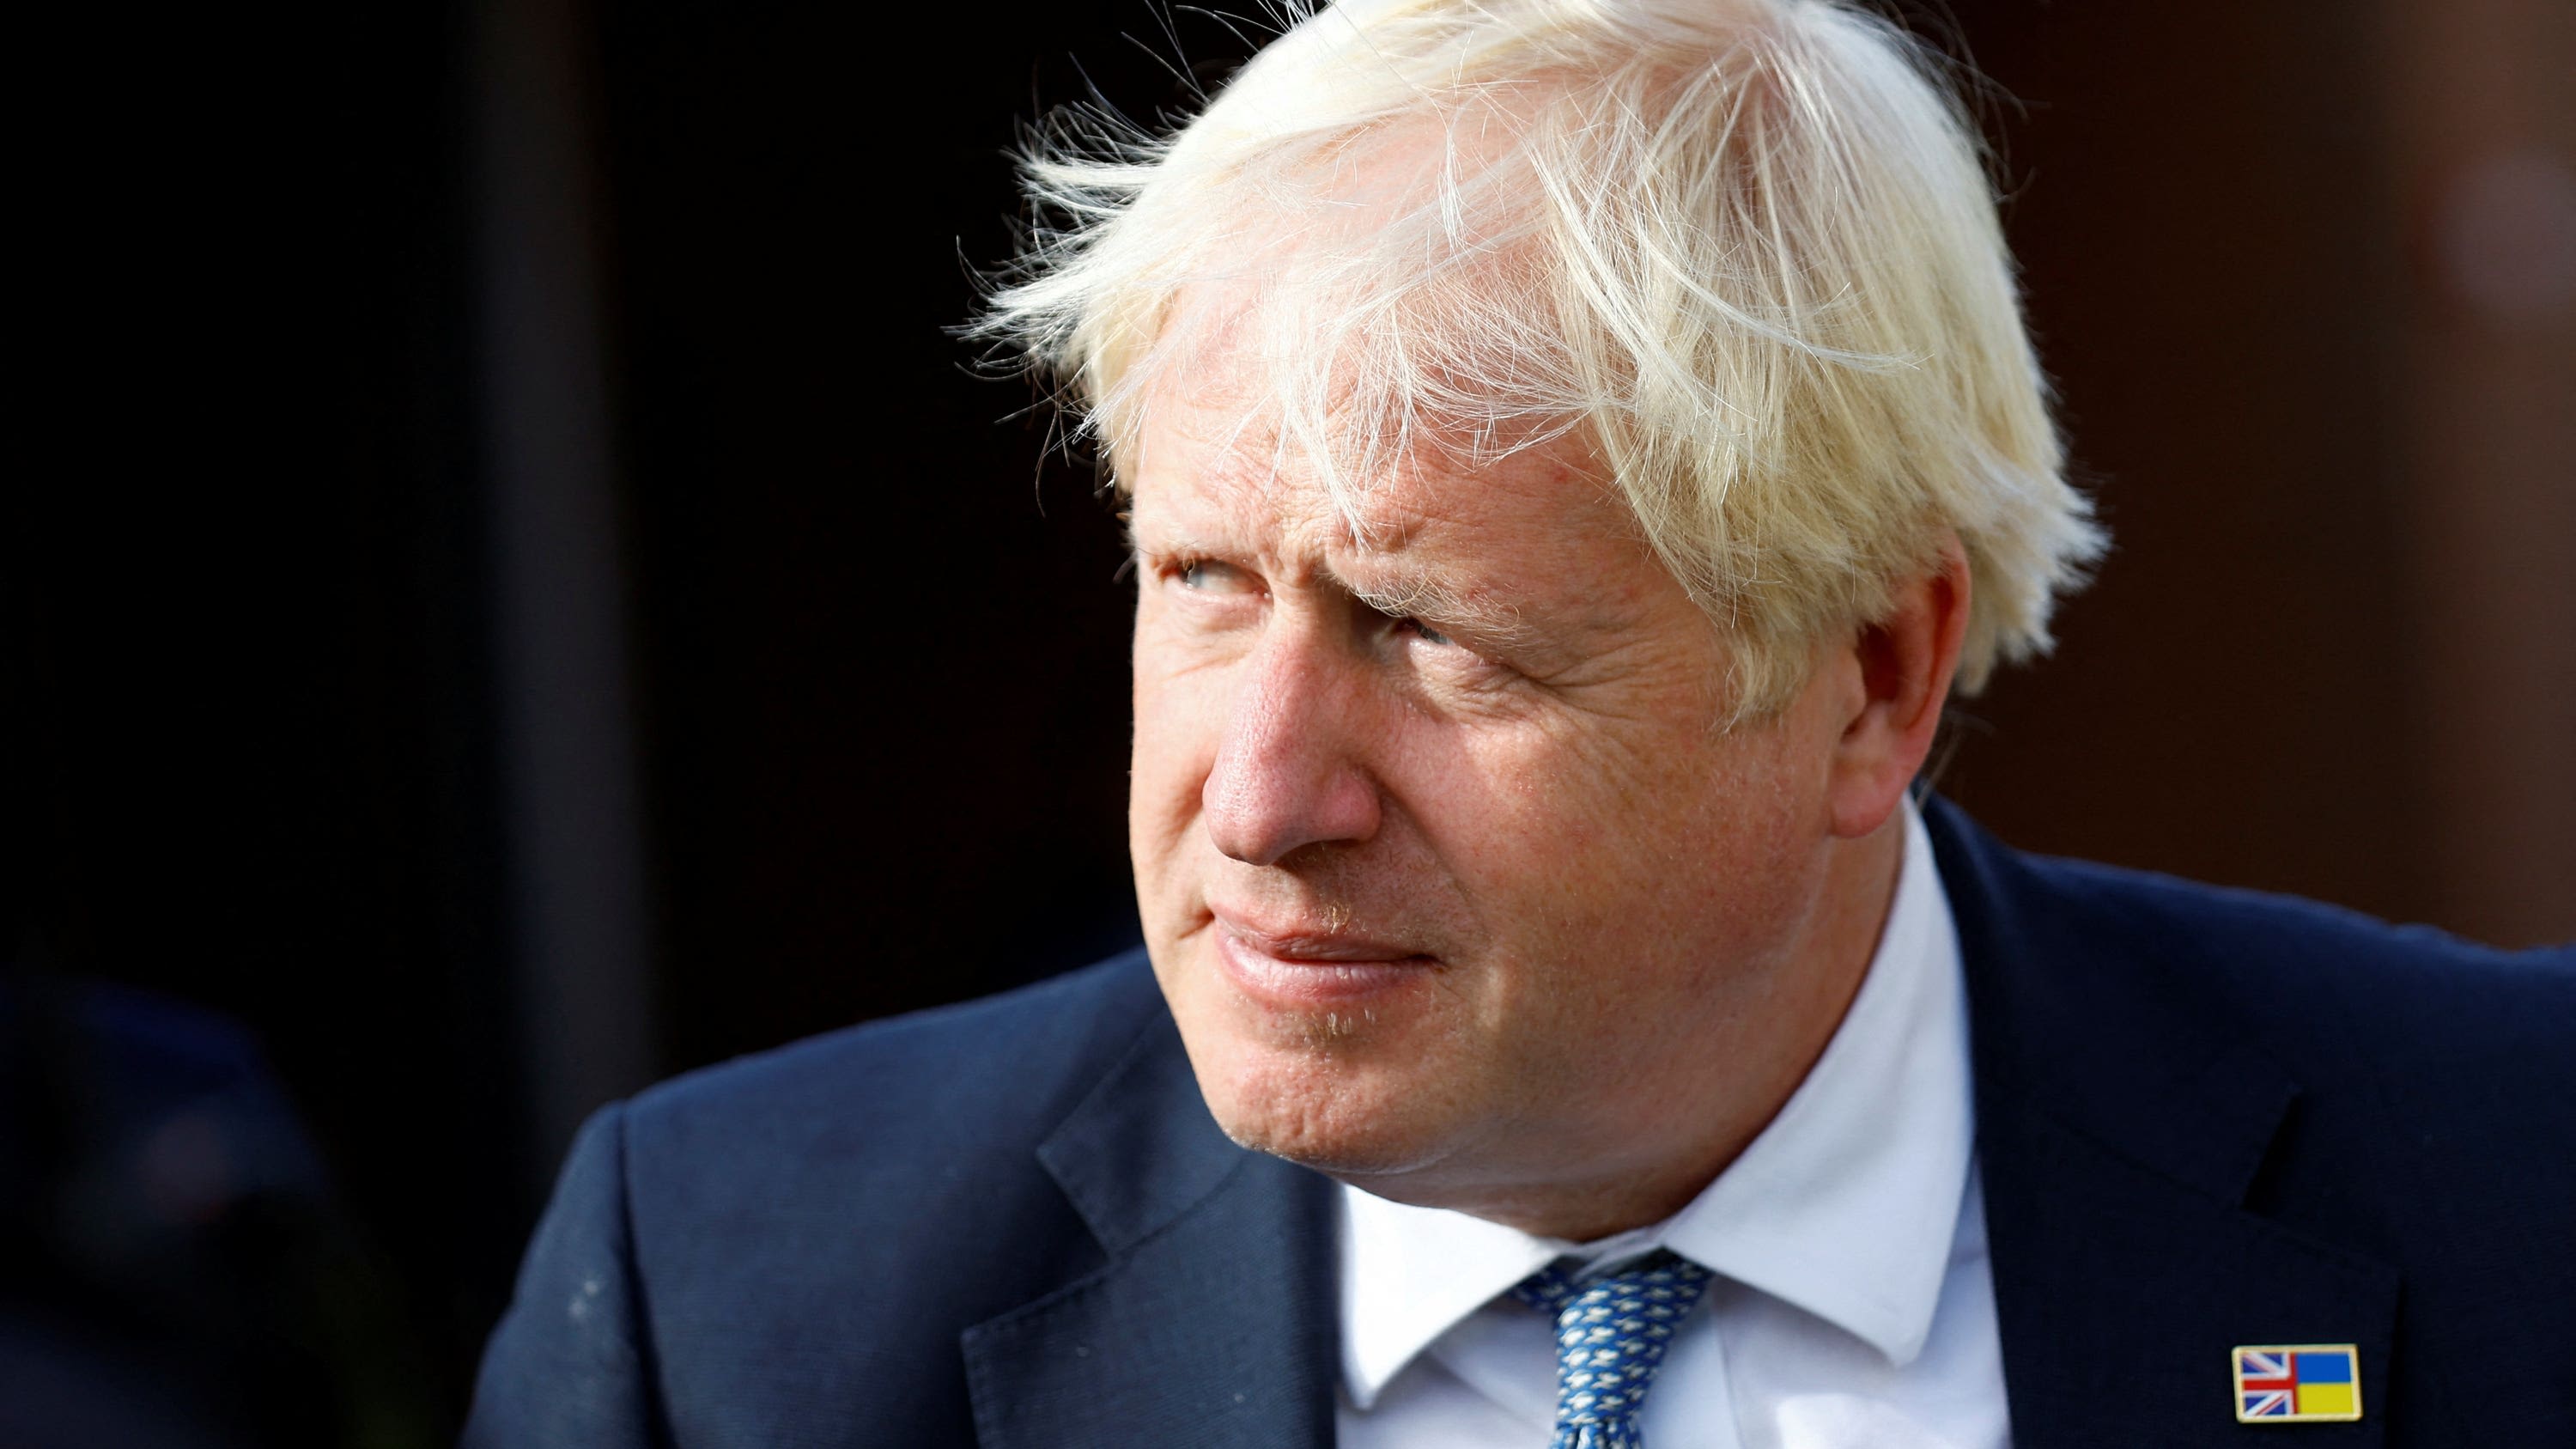 Boris Johnson thanks villagers who refused to let him vote without ID